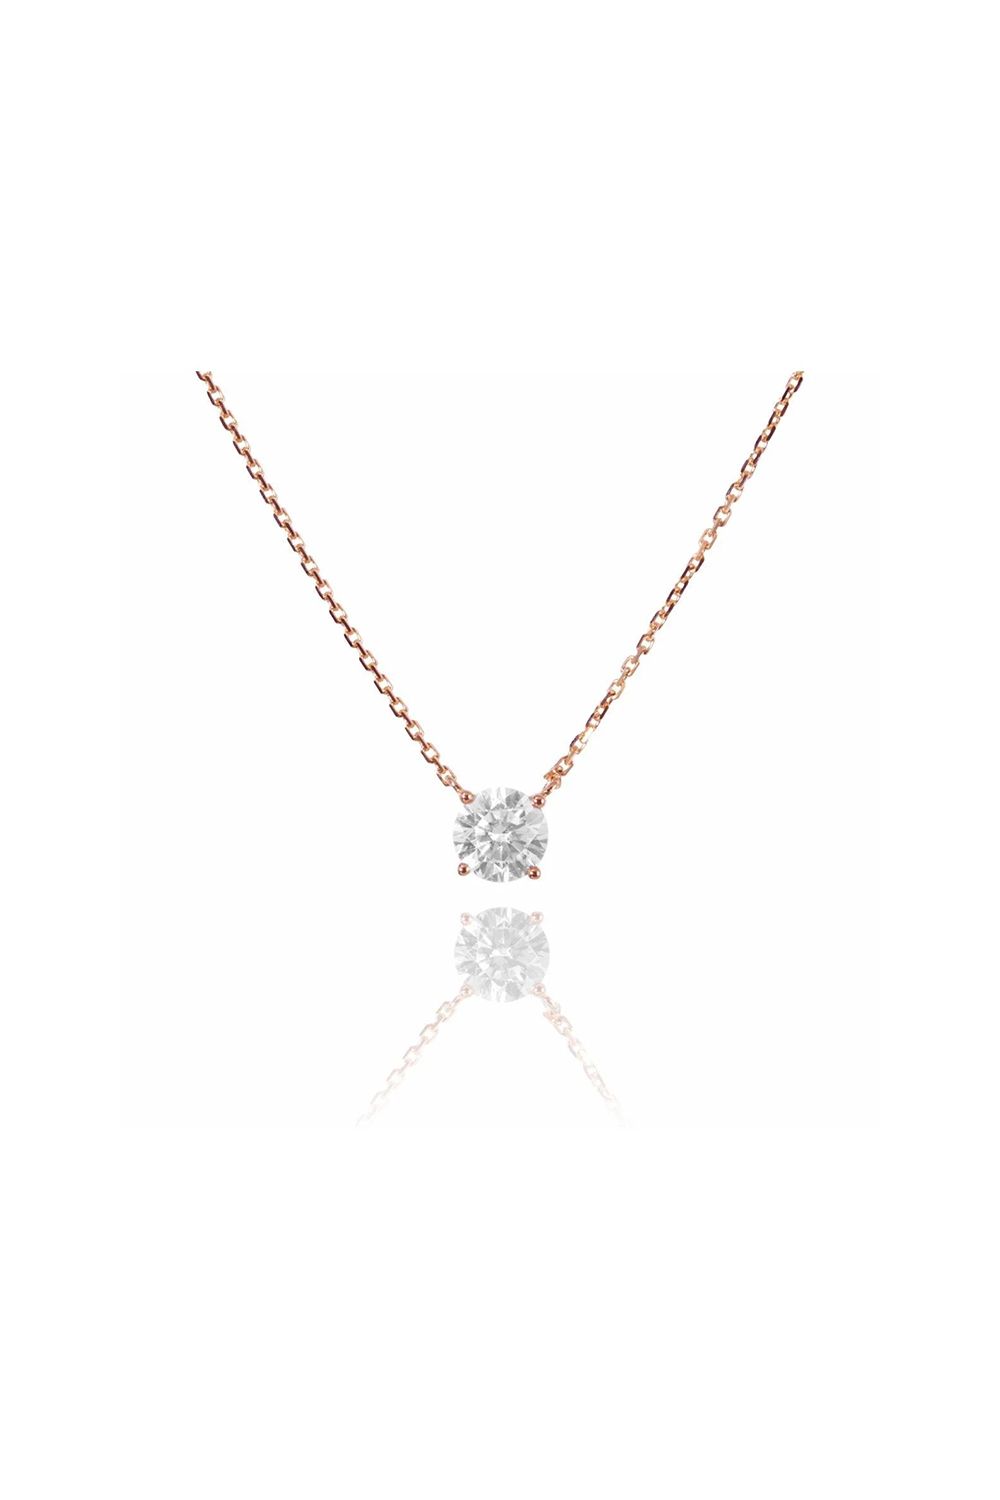 GYPPHY - SOLITAIRE MOISSANITE NECKLACE / ソリティア モアサナイト